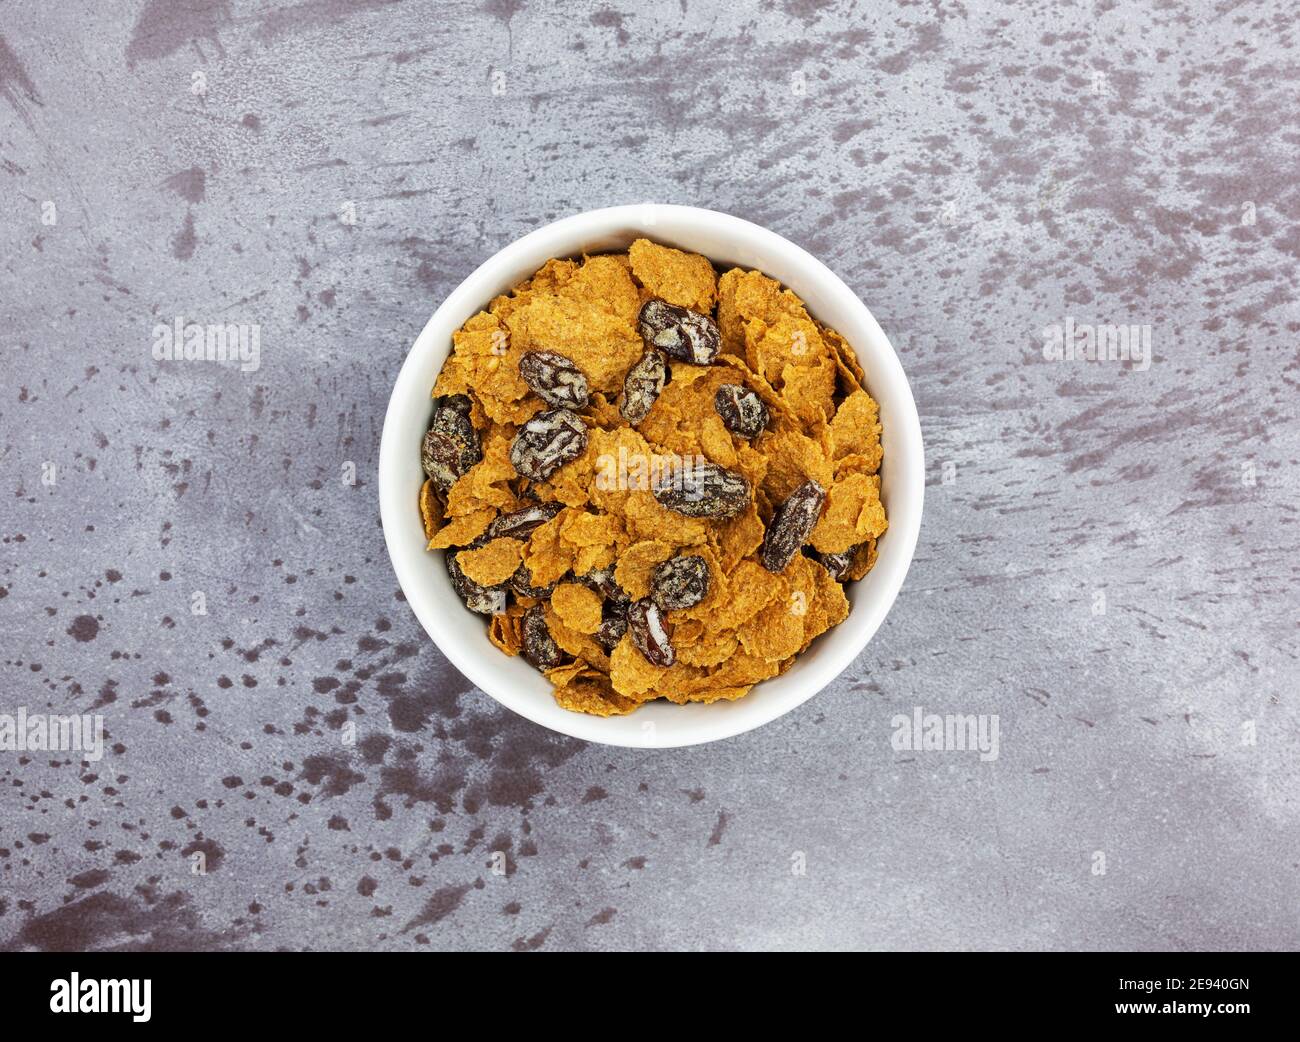 Top view of a white bowl filled with bran flakes and raisins breakfast cereal on a gray background. Stock Photo